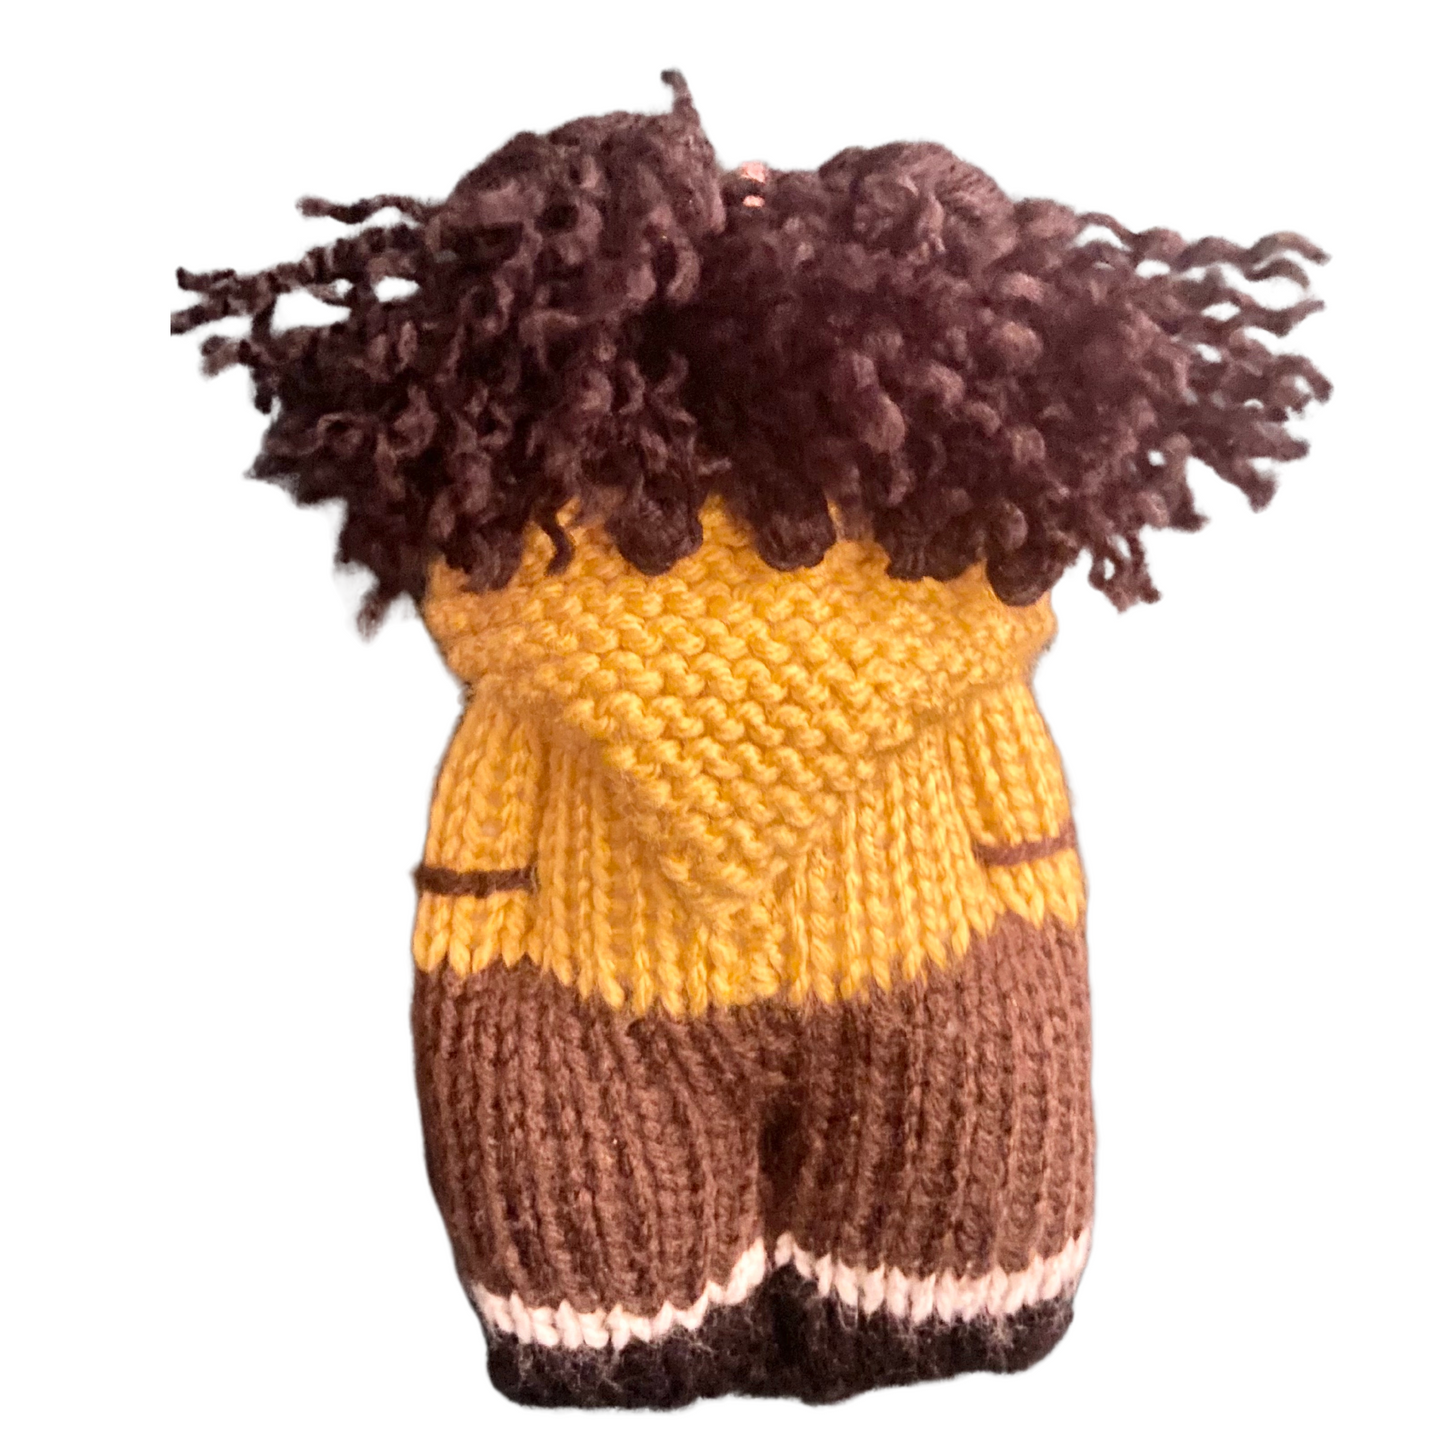 Black Knit doll: Braided two buns character from book with yellow hoodie